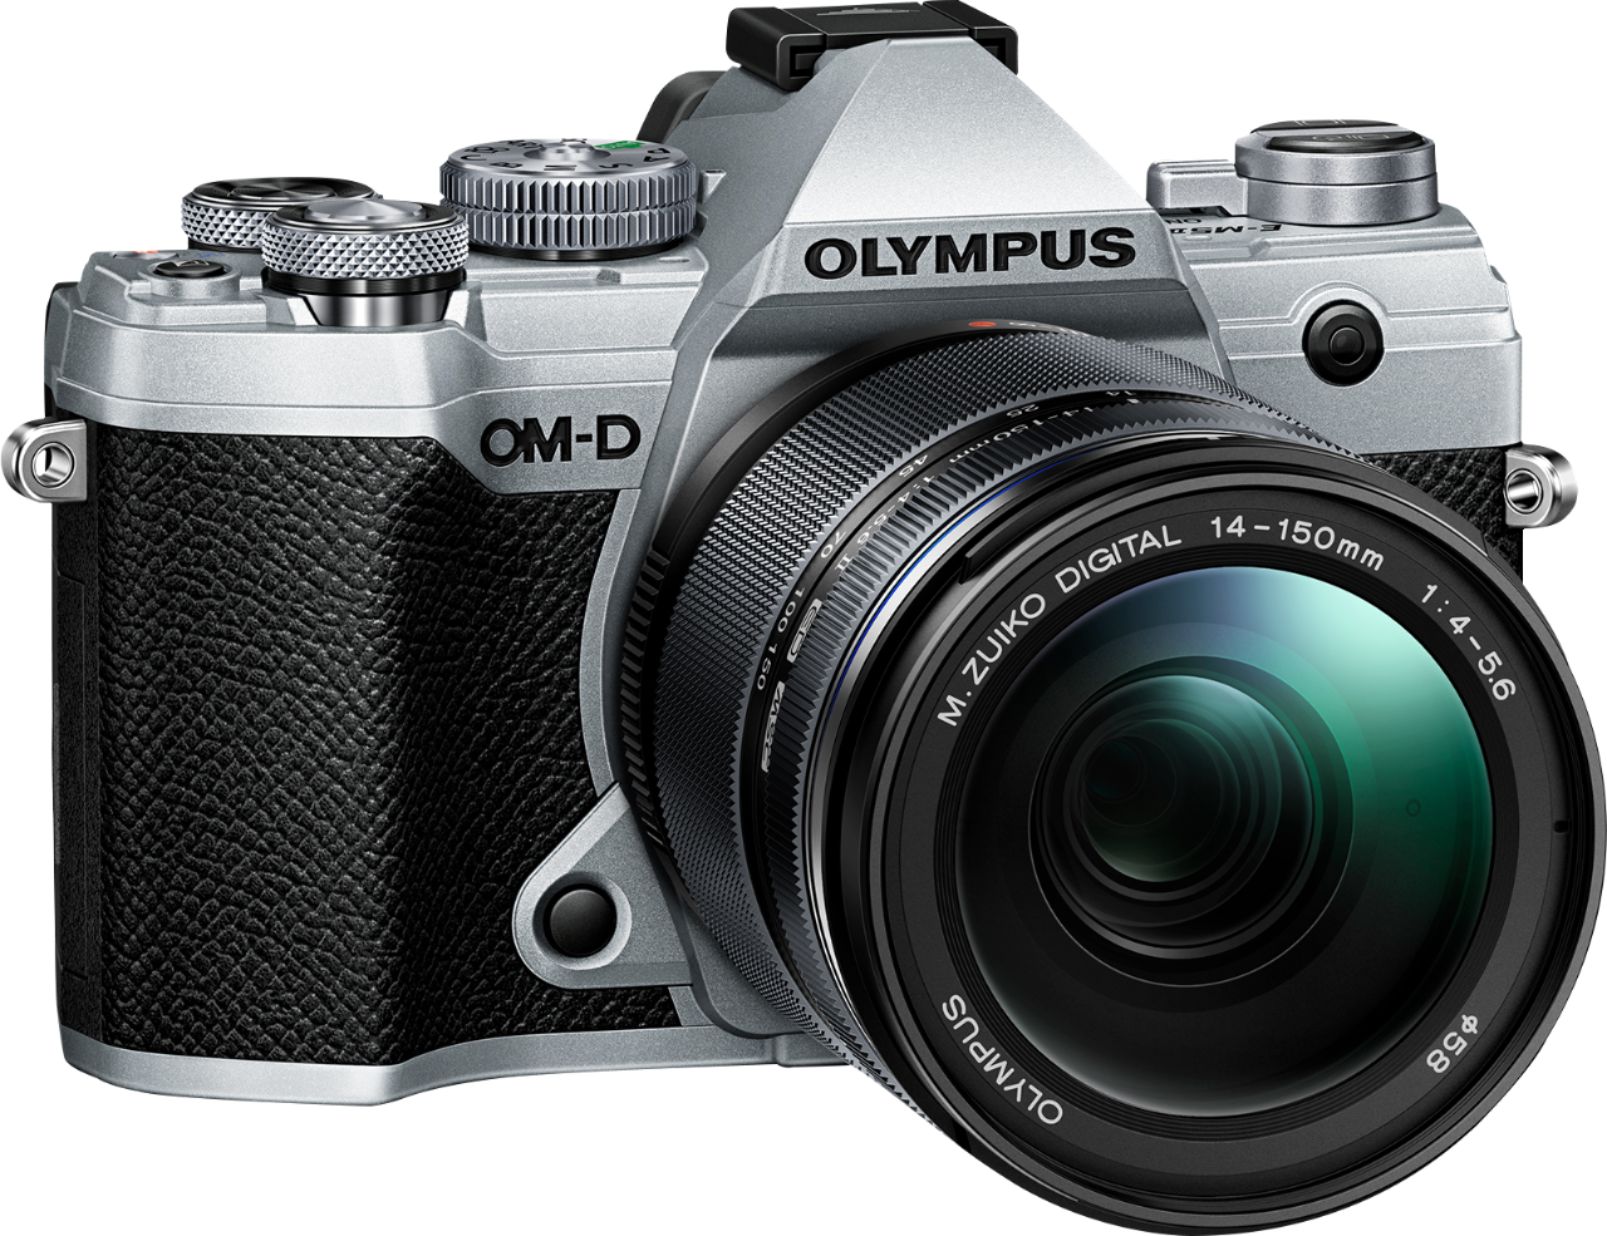 Angle View: Olympus - OM-D E-M5 Mark III Mirrorless Camera with 14-150mm Lens - Silver